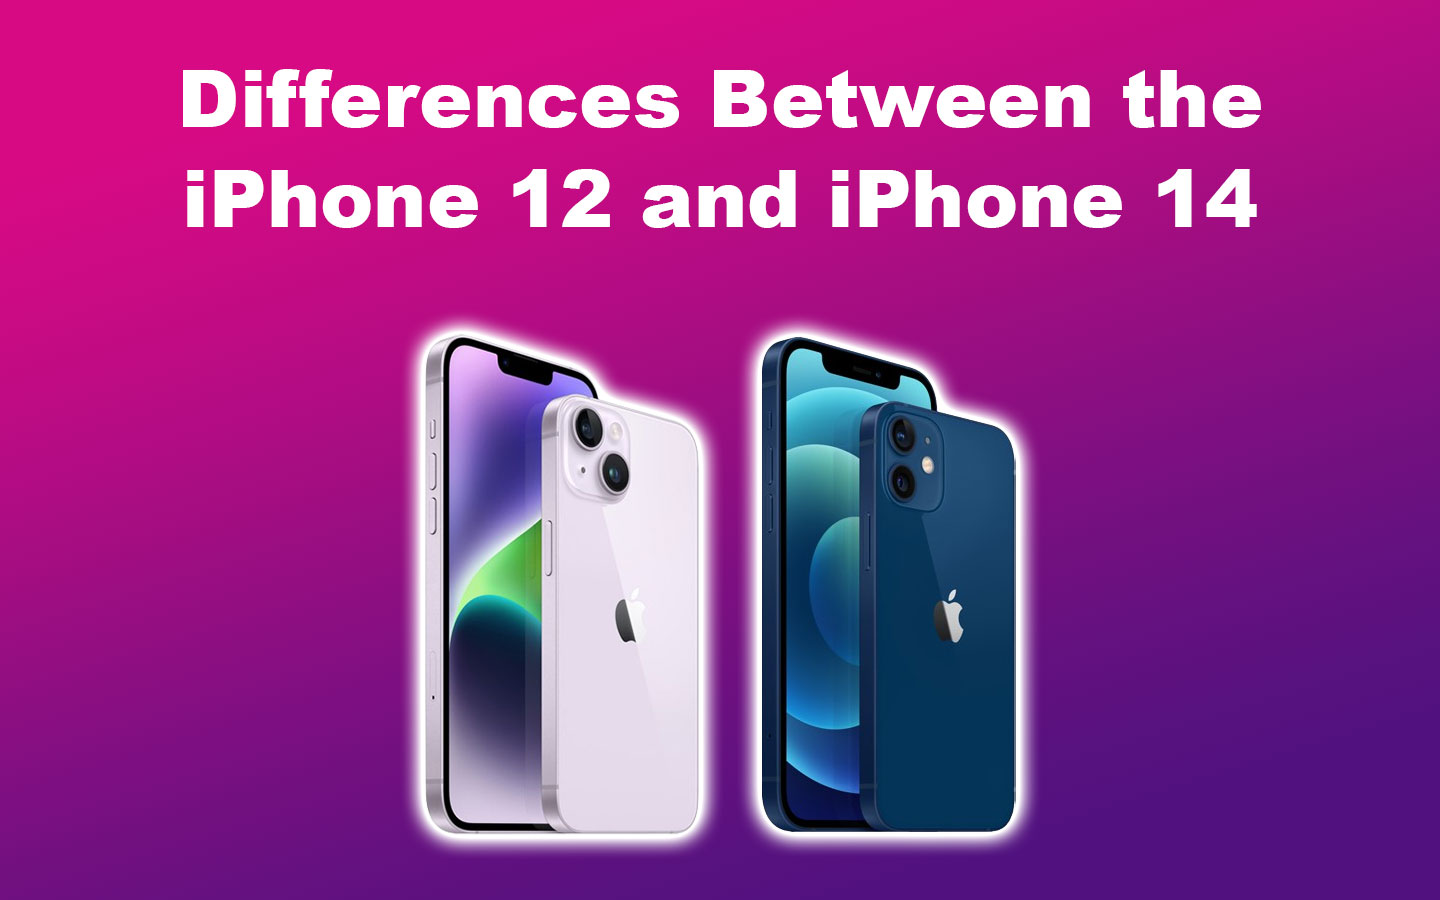 Differences Between the iPhone 12 and iPhone 14